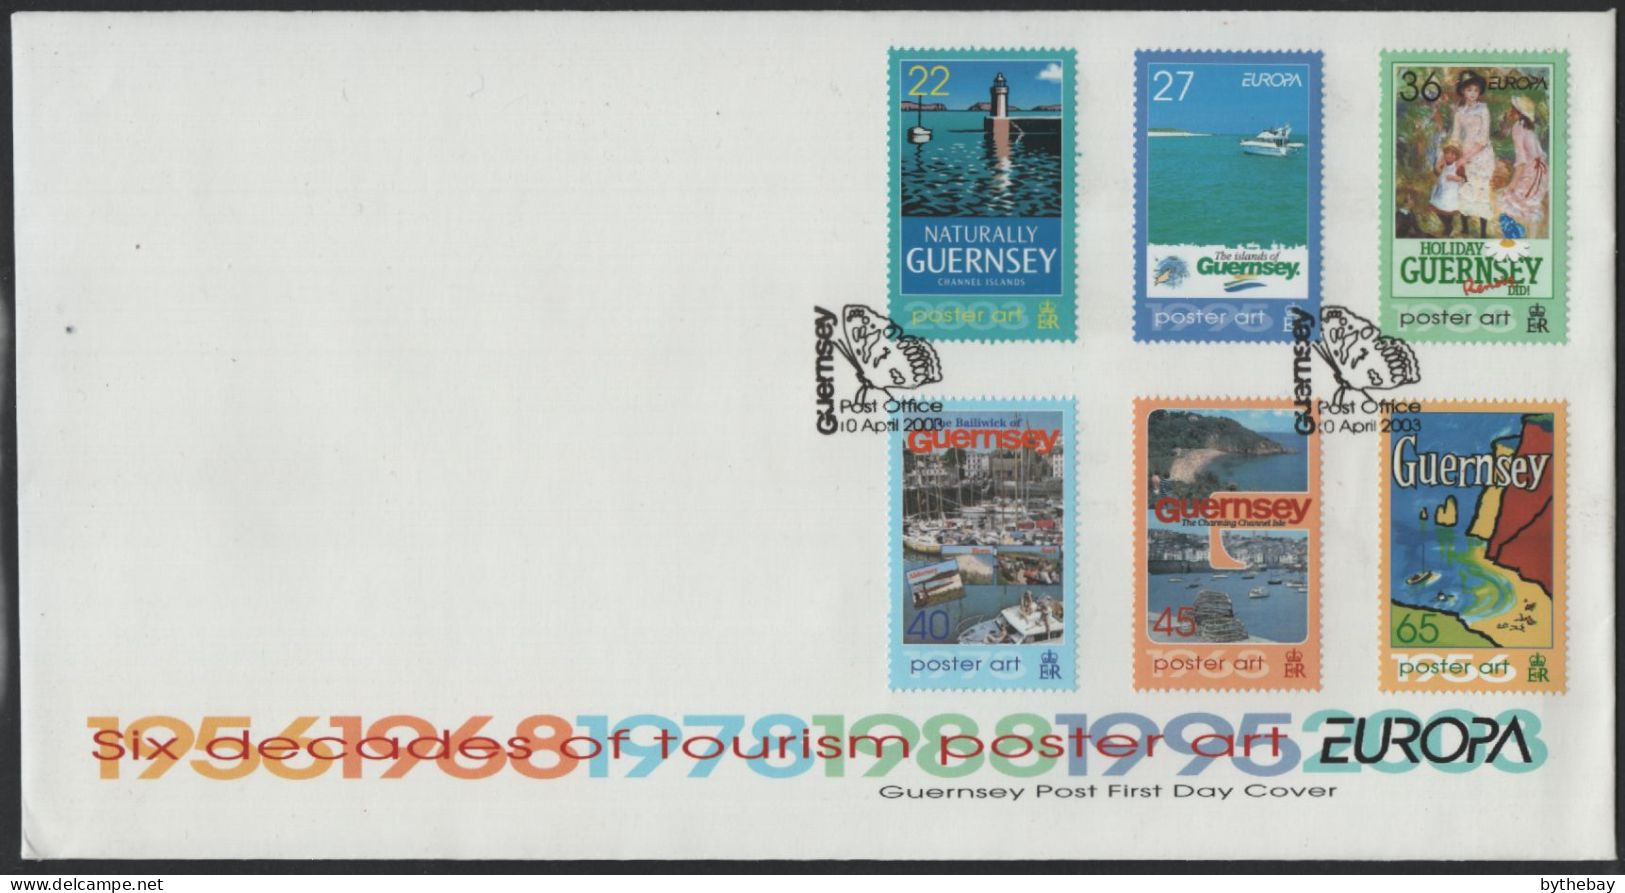 Guernsey 2003 FDC Sc 801-806 Tourism Poster Art - Guernesey